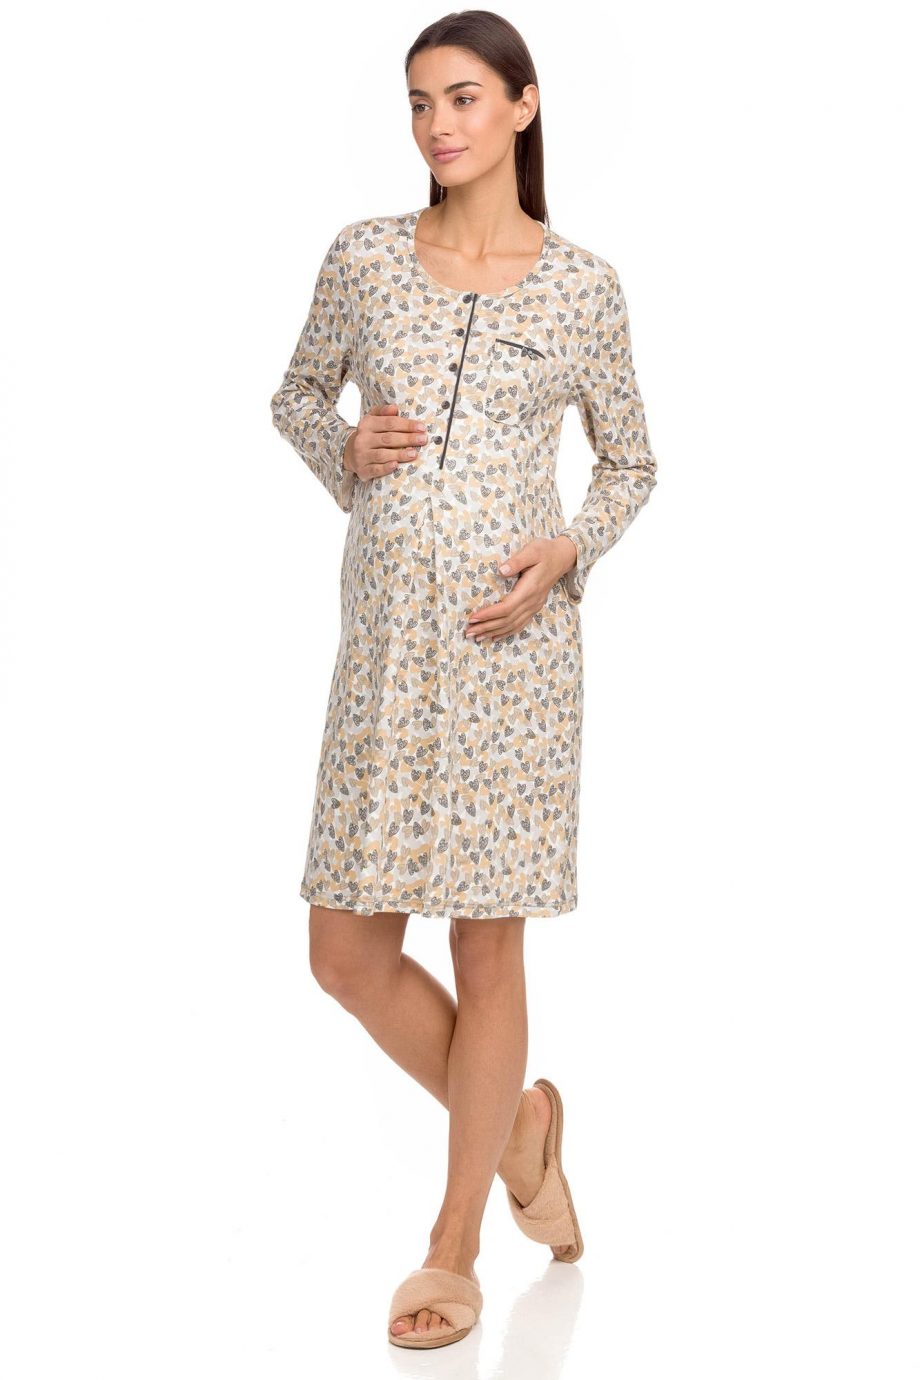 Women’s Nightgown with hearts